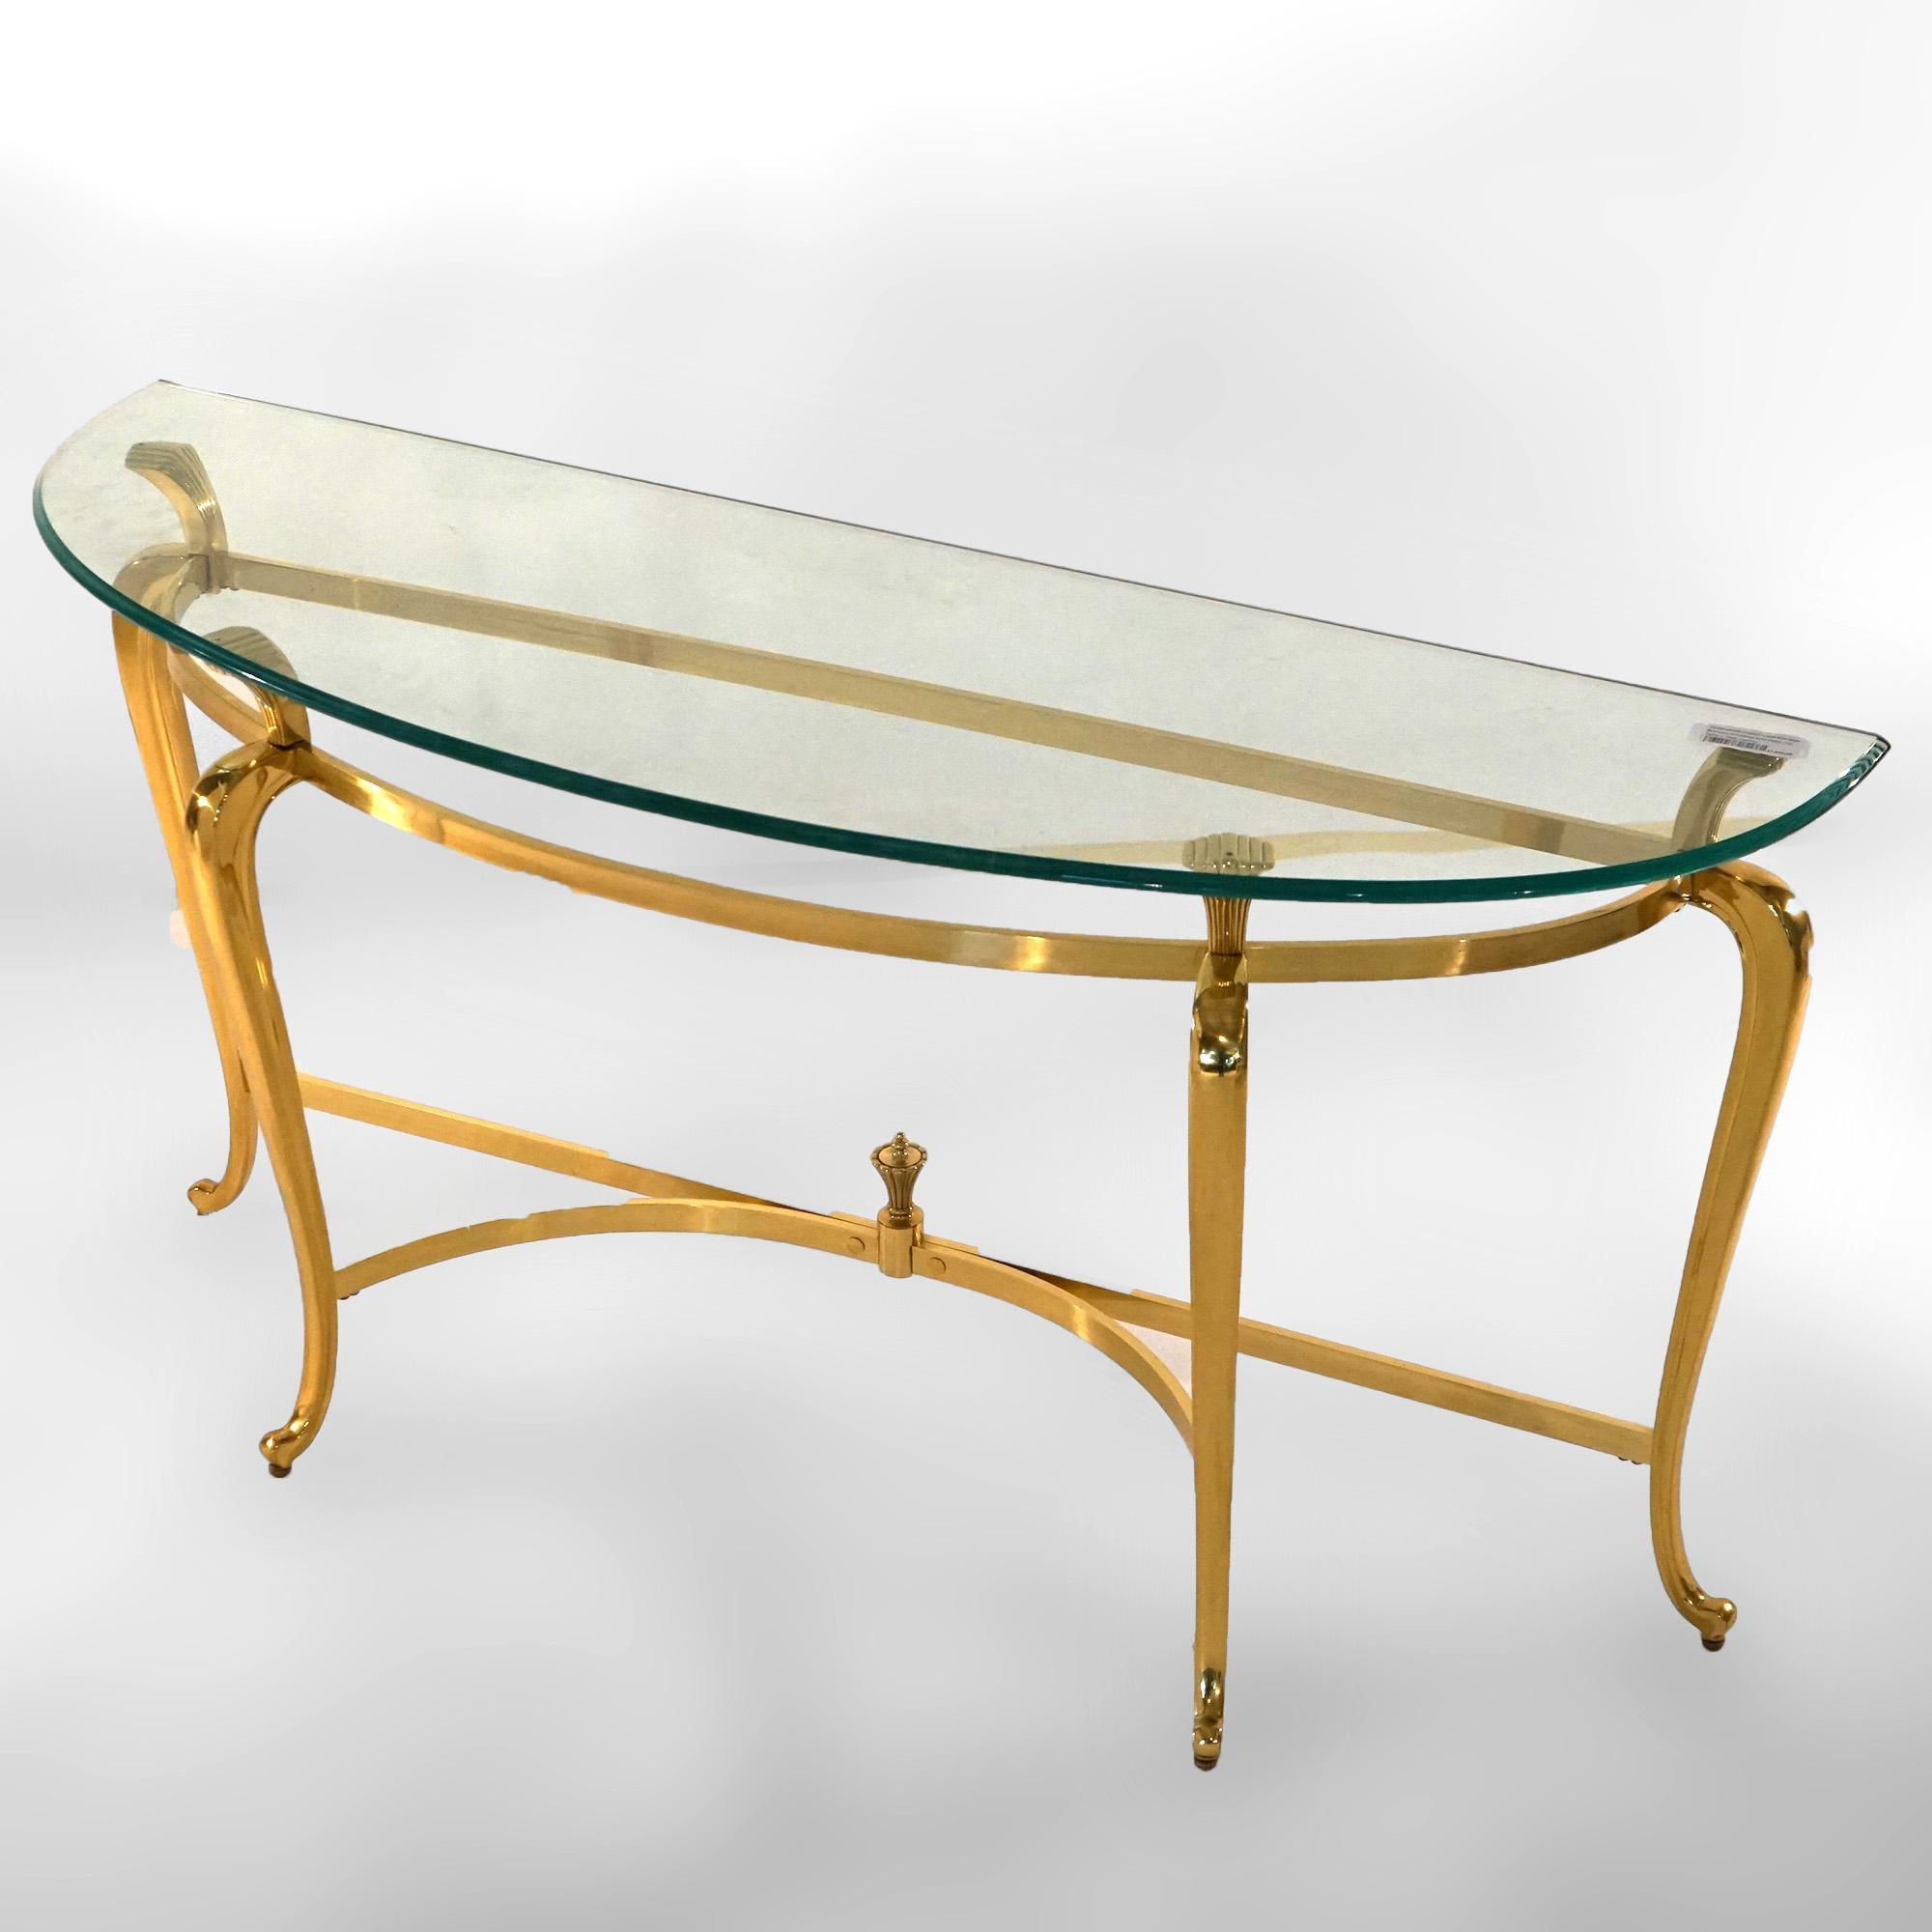 French Louis XIV Style Bronzed Gilt Metal Glass Top Console Table 20th C For Sale 5